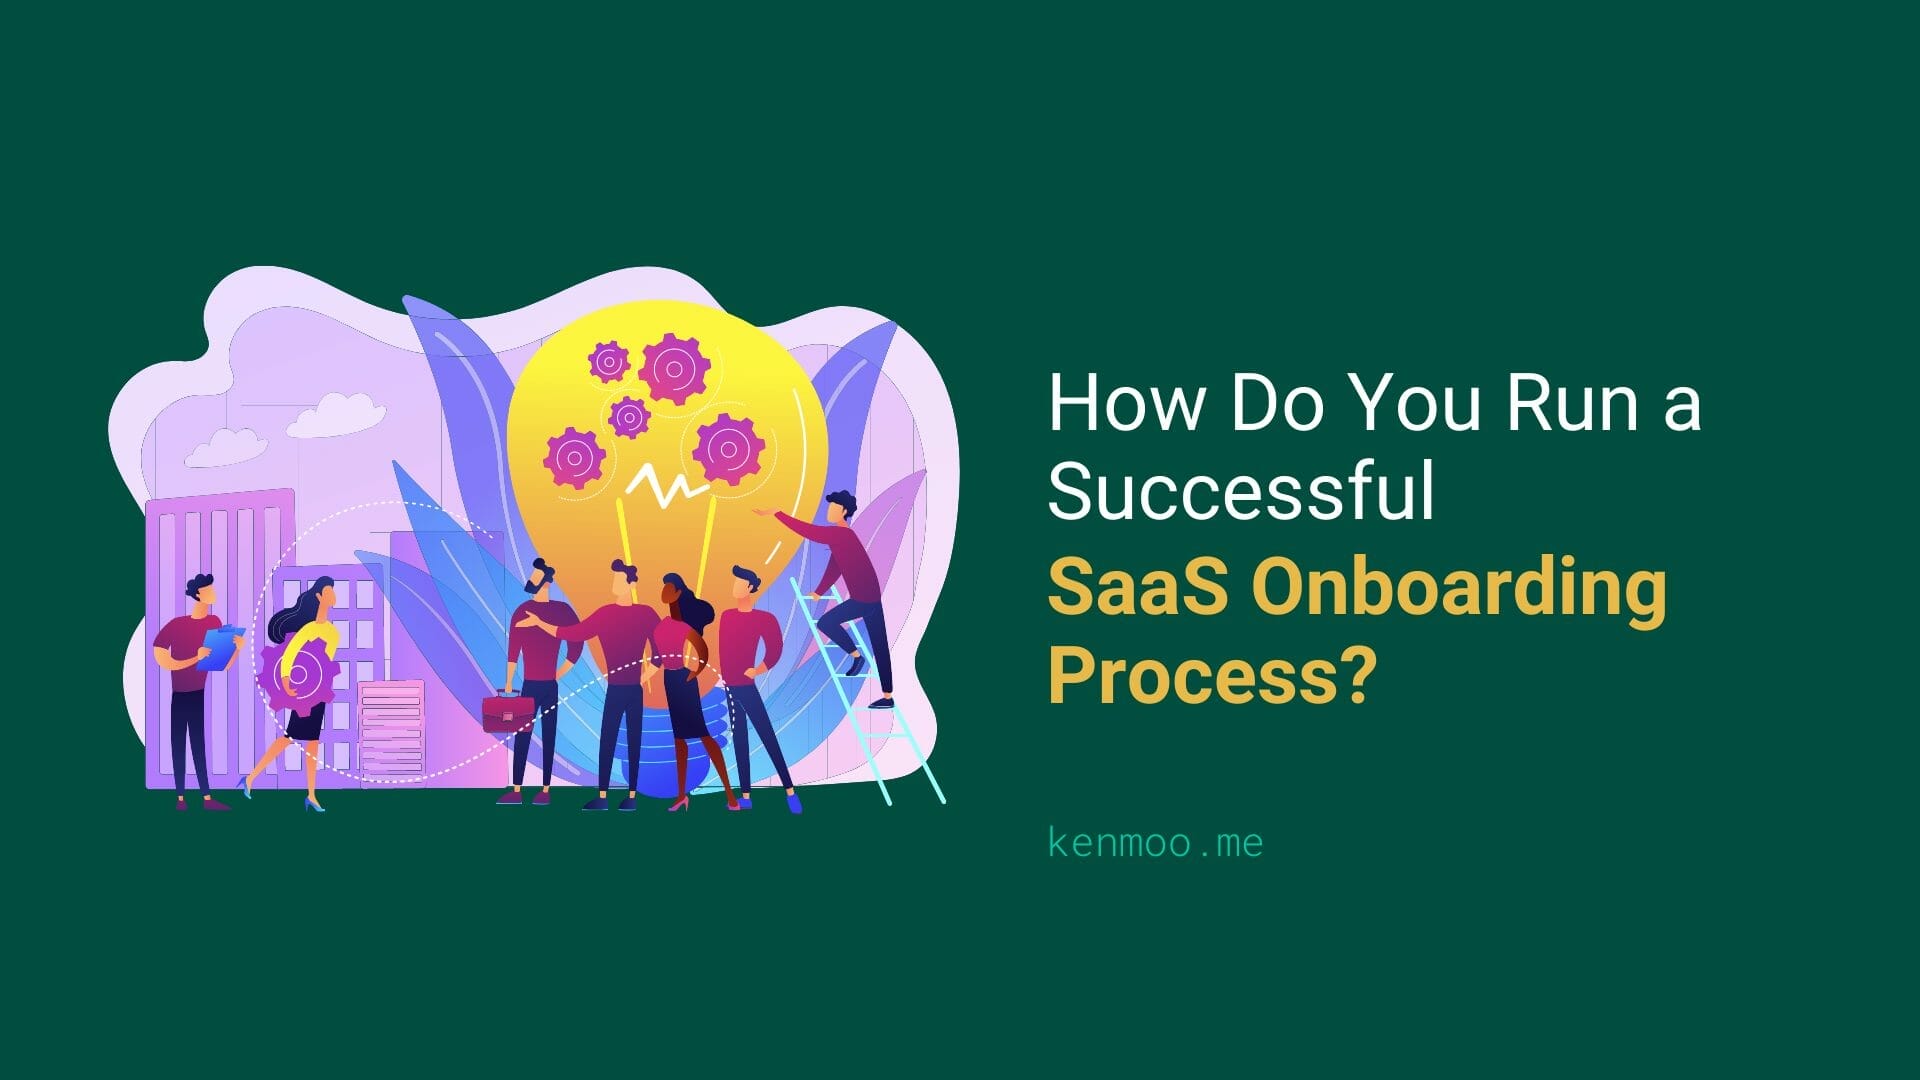 How Do You Run a Successful SaaS Onboarding Process?